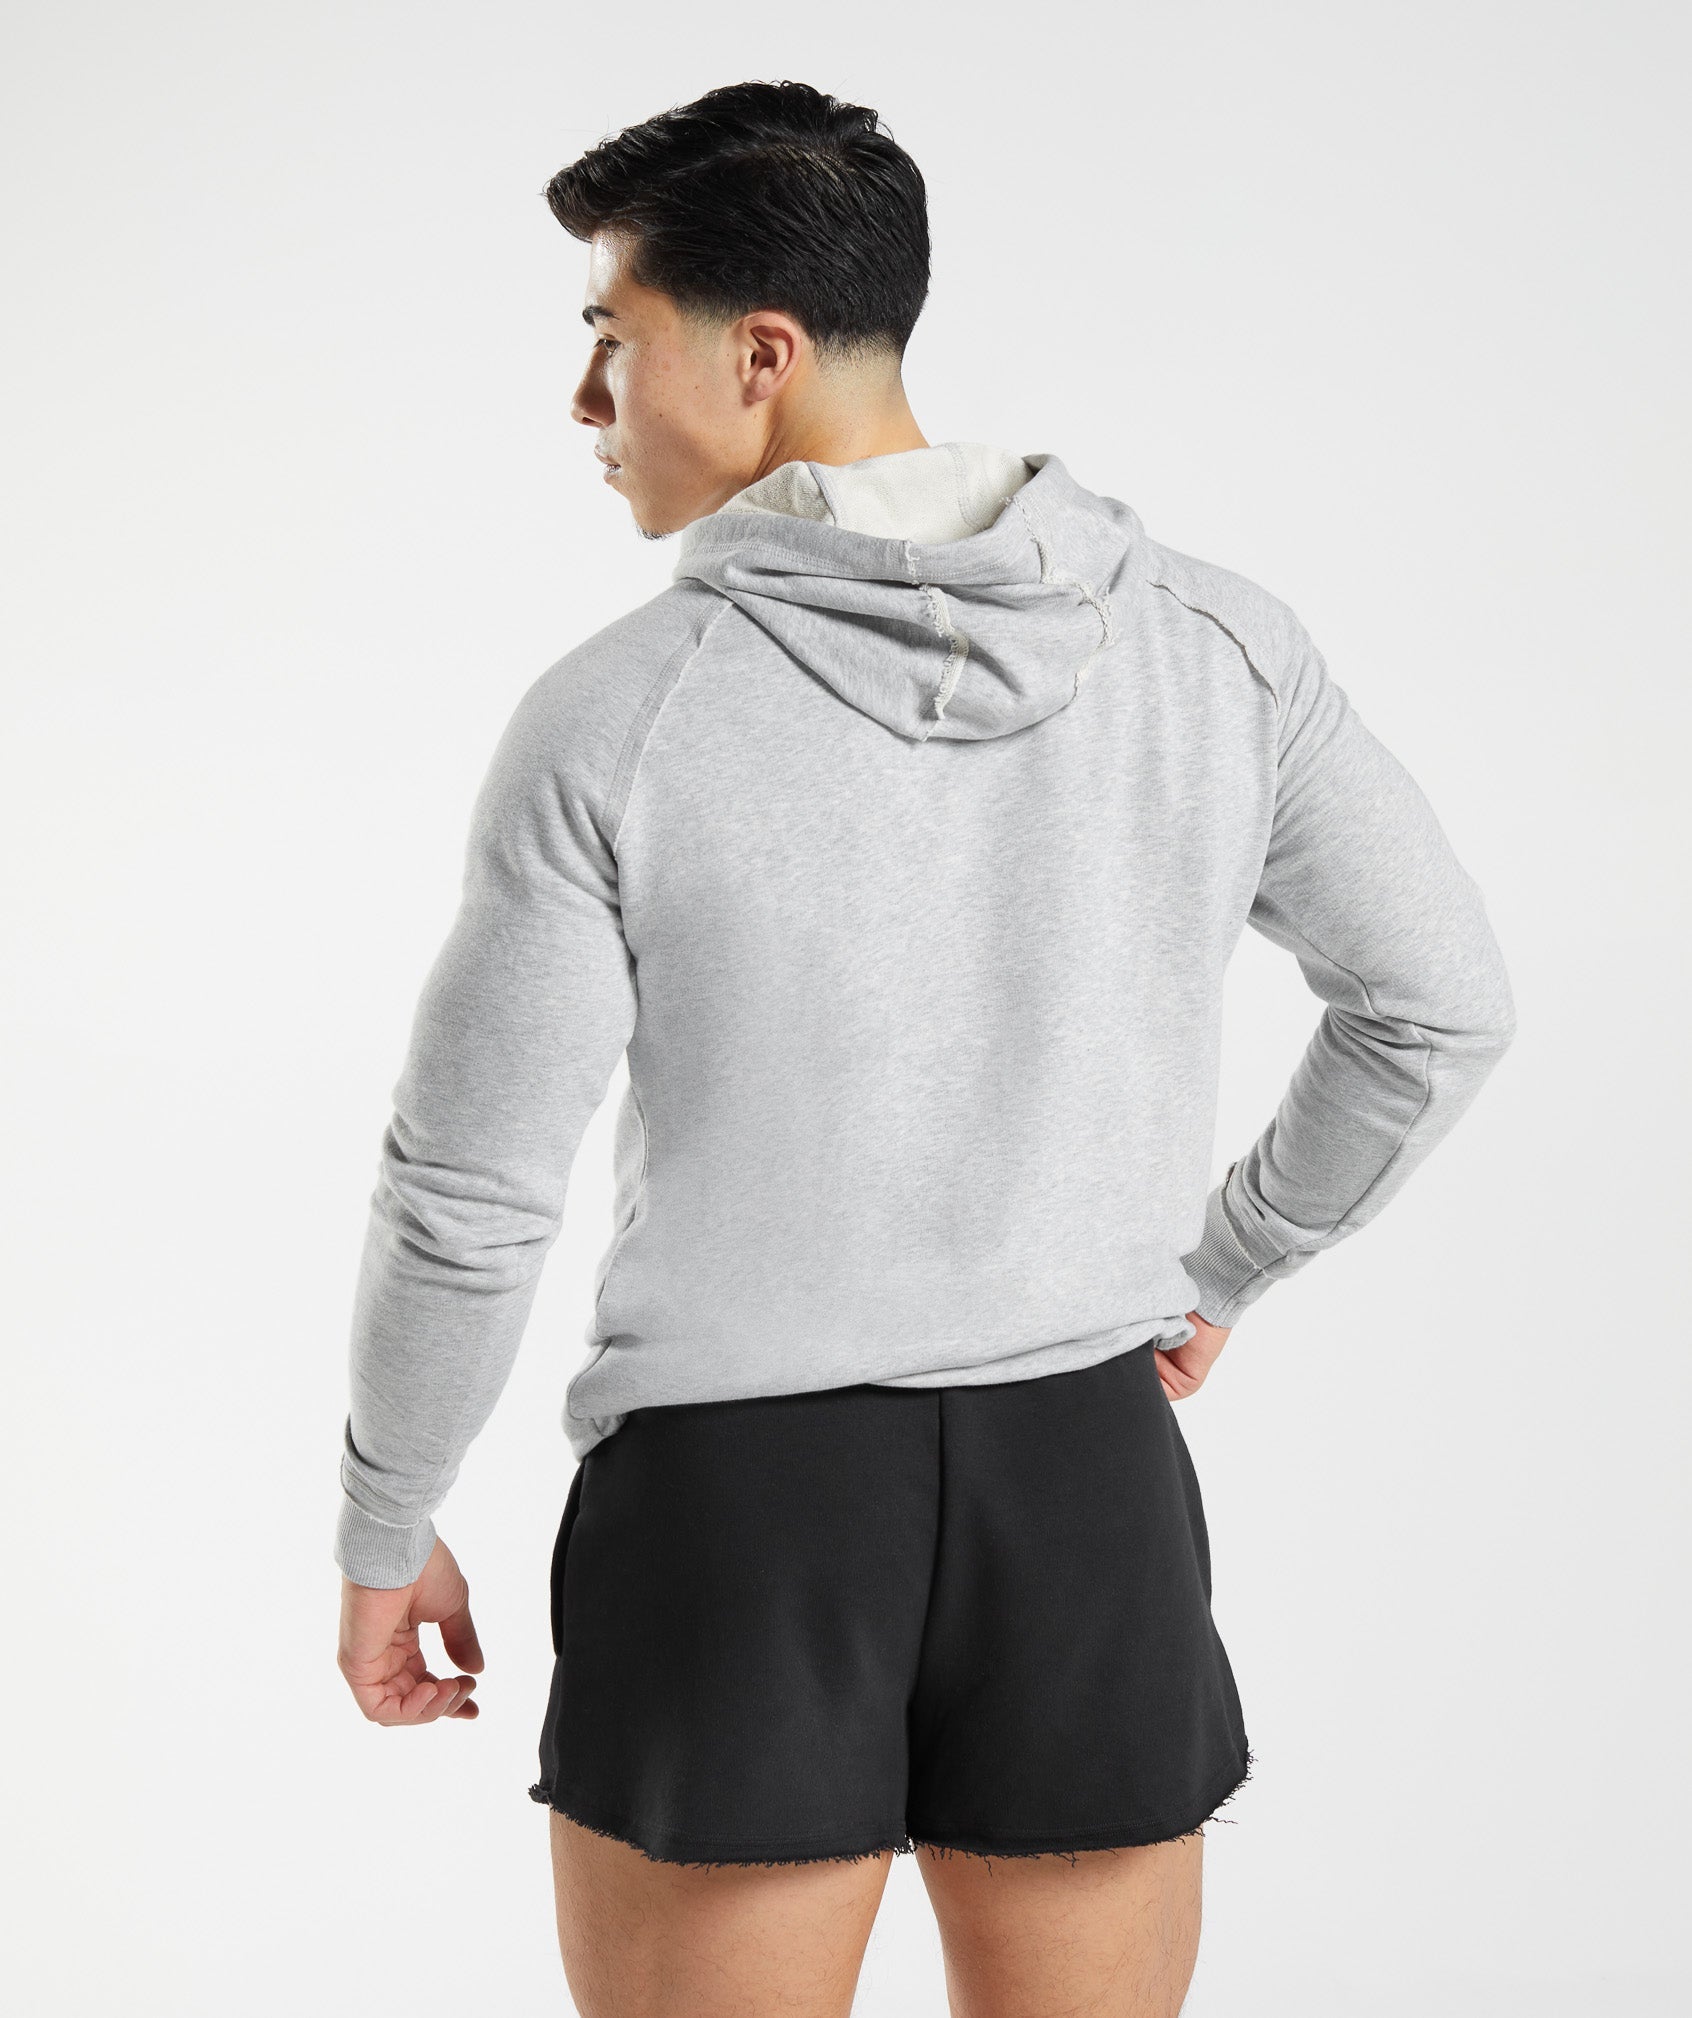 Gymshark on X: The Gymshark Luxe hoodie in size medium will be back in  stock today! Medium Mesh bottoms too    / X